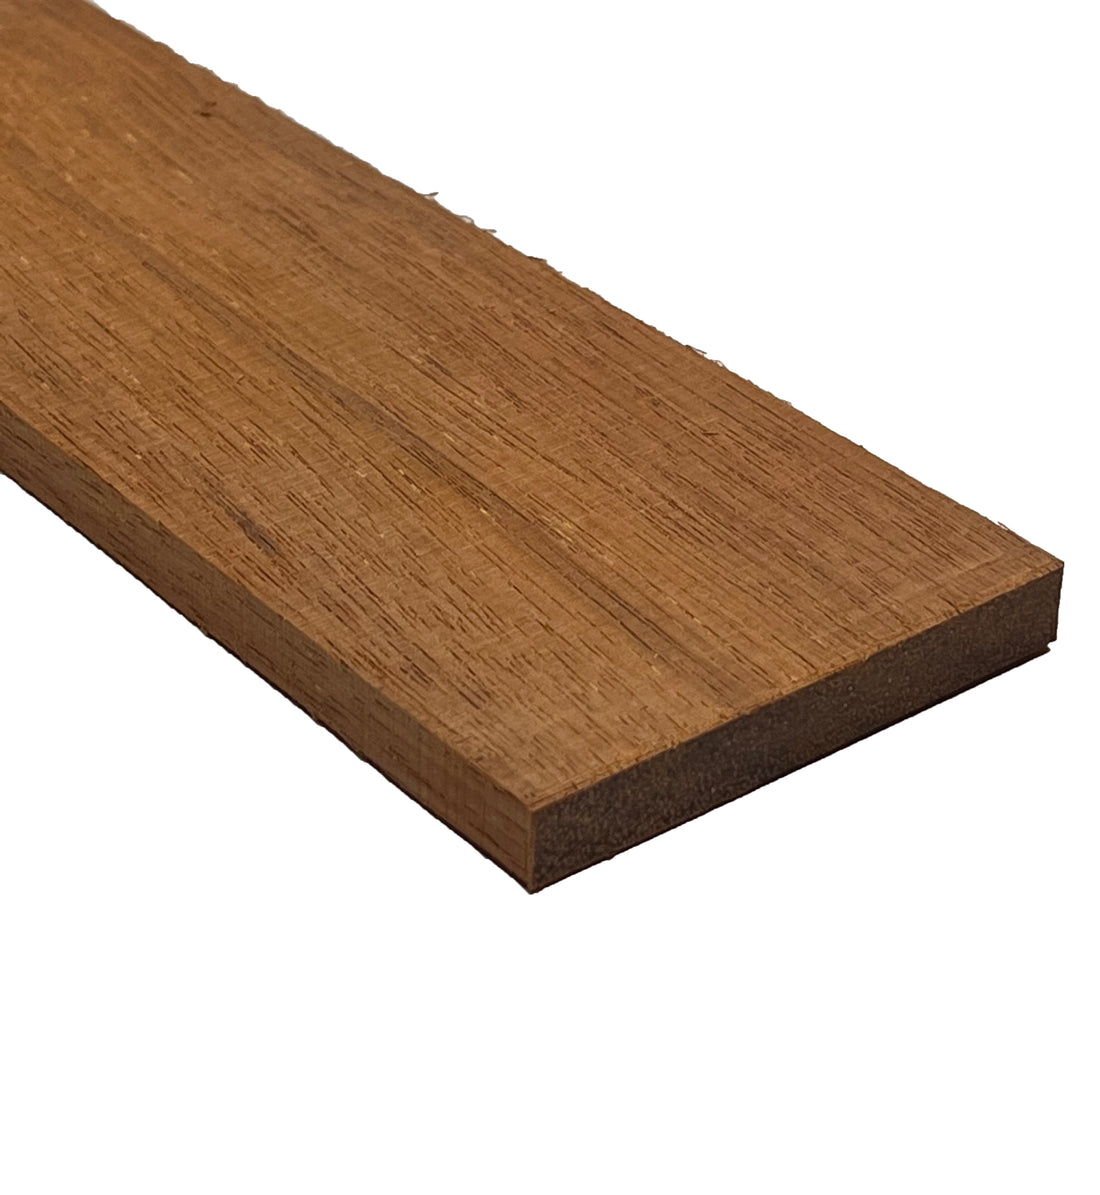 Merbau Thin Stock Lumber Boards Wood Crafts - Exotic Wood Zone - Buy online Across USA 